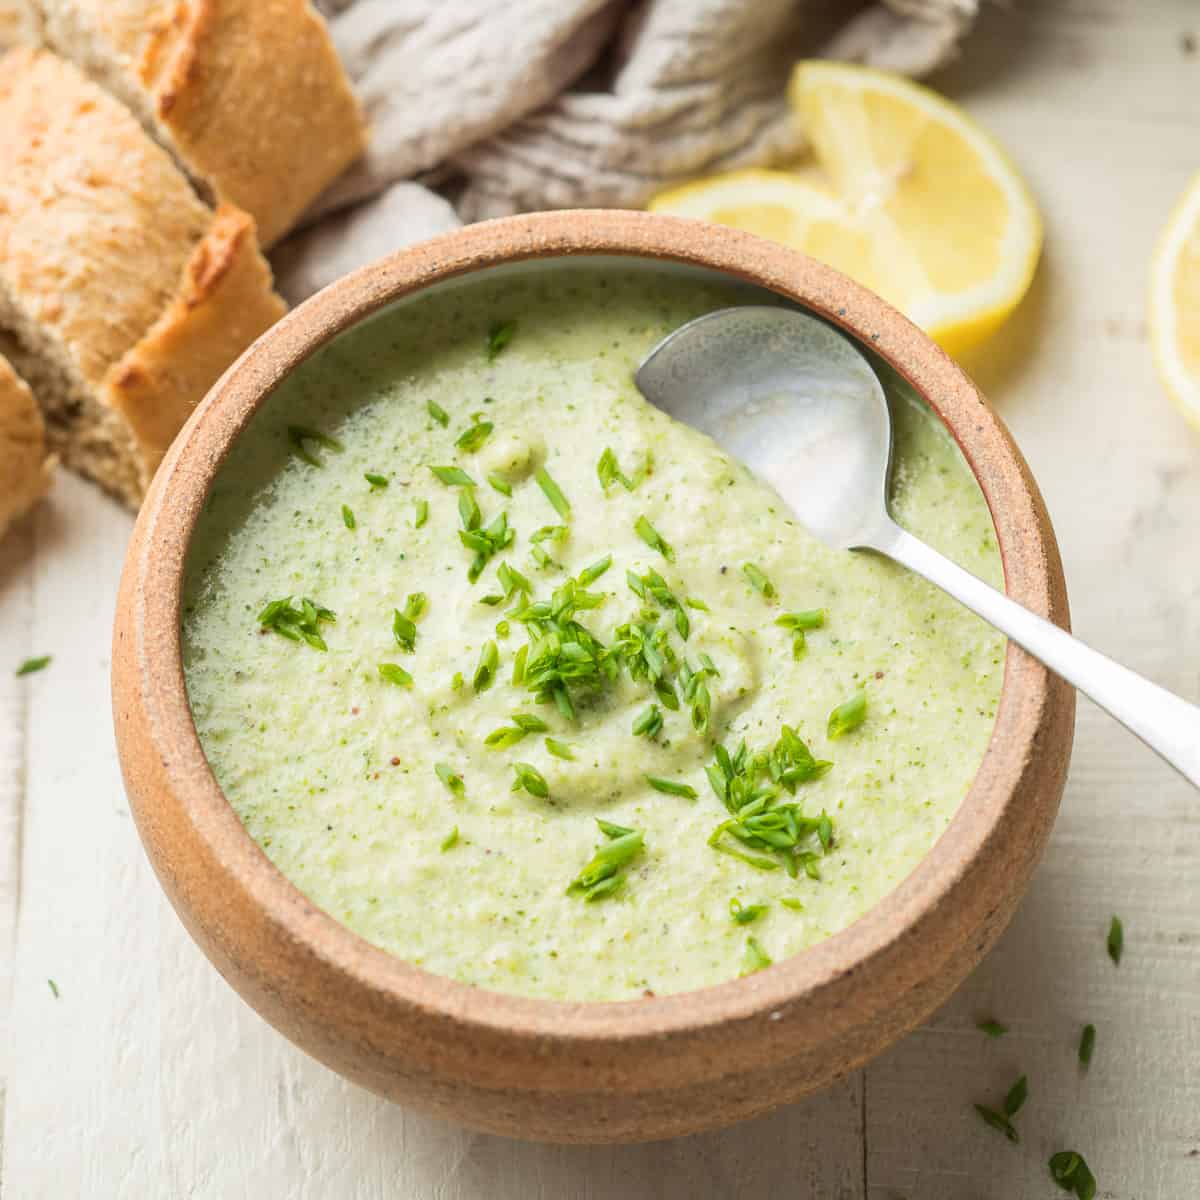 Bowl of Vegan Cream of Broccoli Soup with Lemon and Bread Slices in the Background